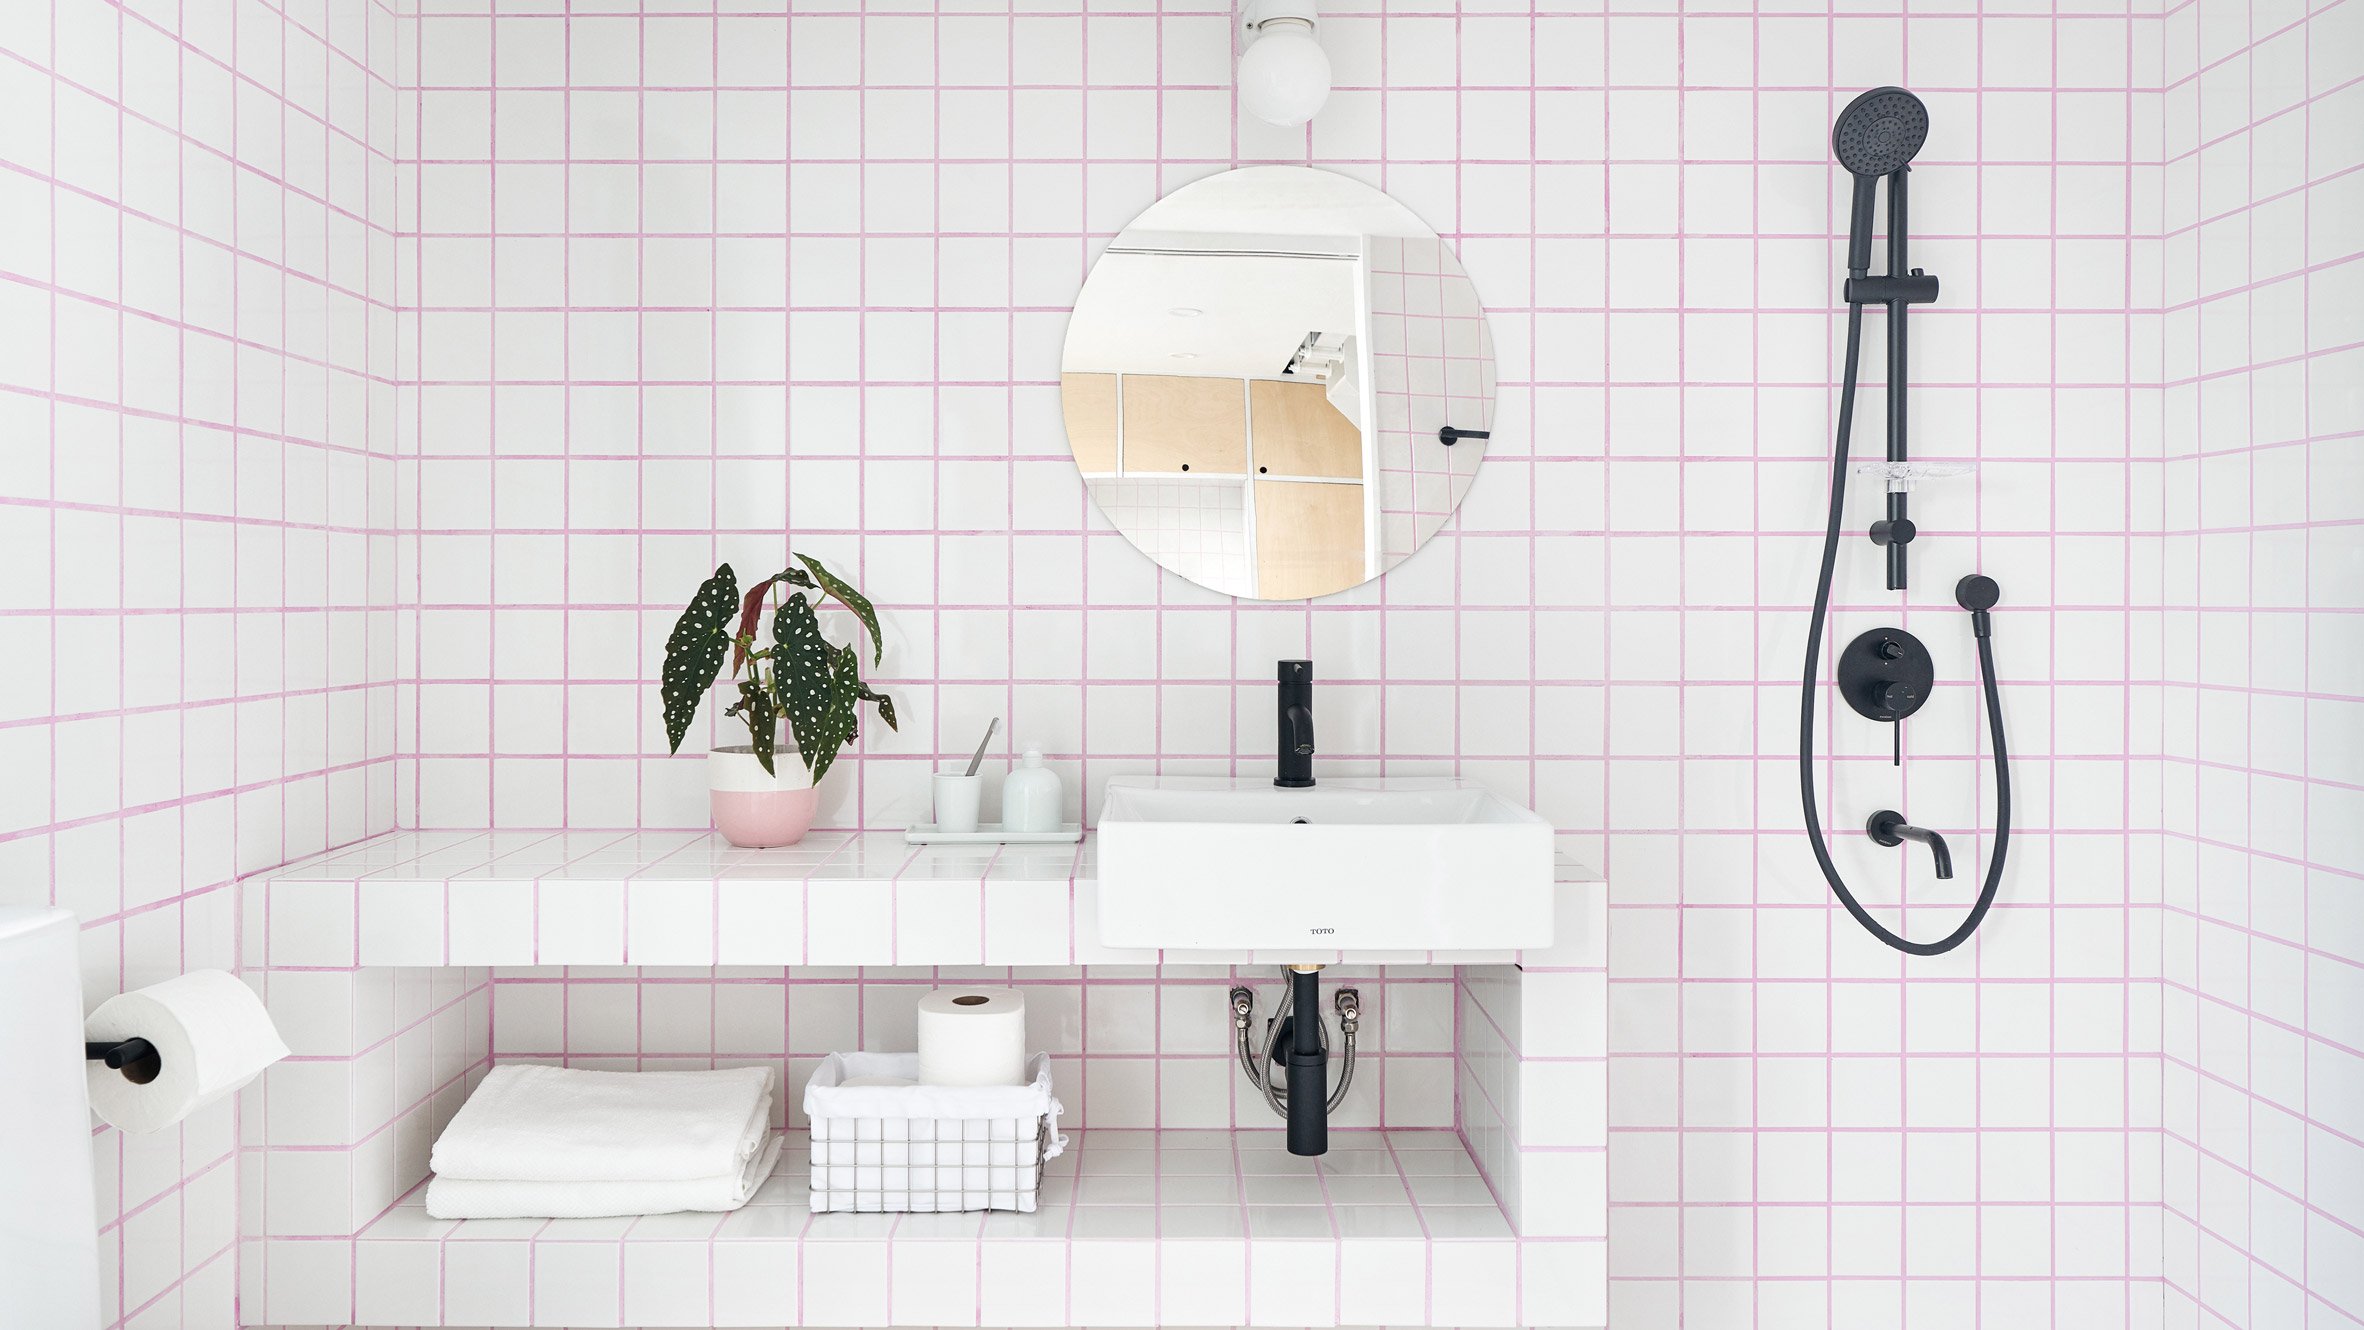 Black and White Bathroom Design: Beauty and Simplicity